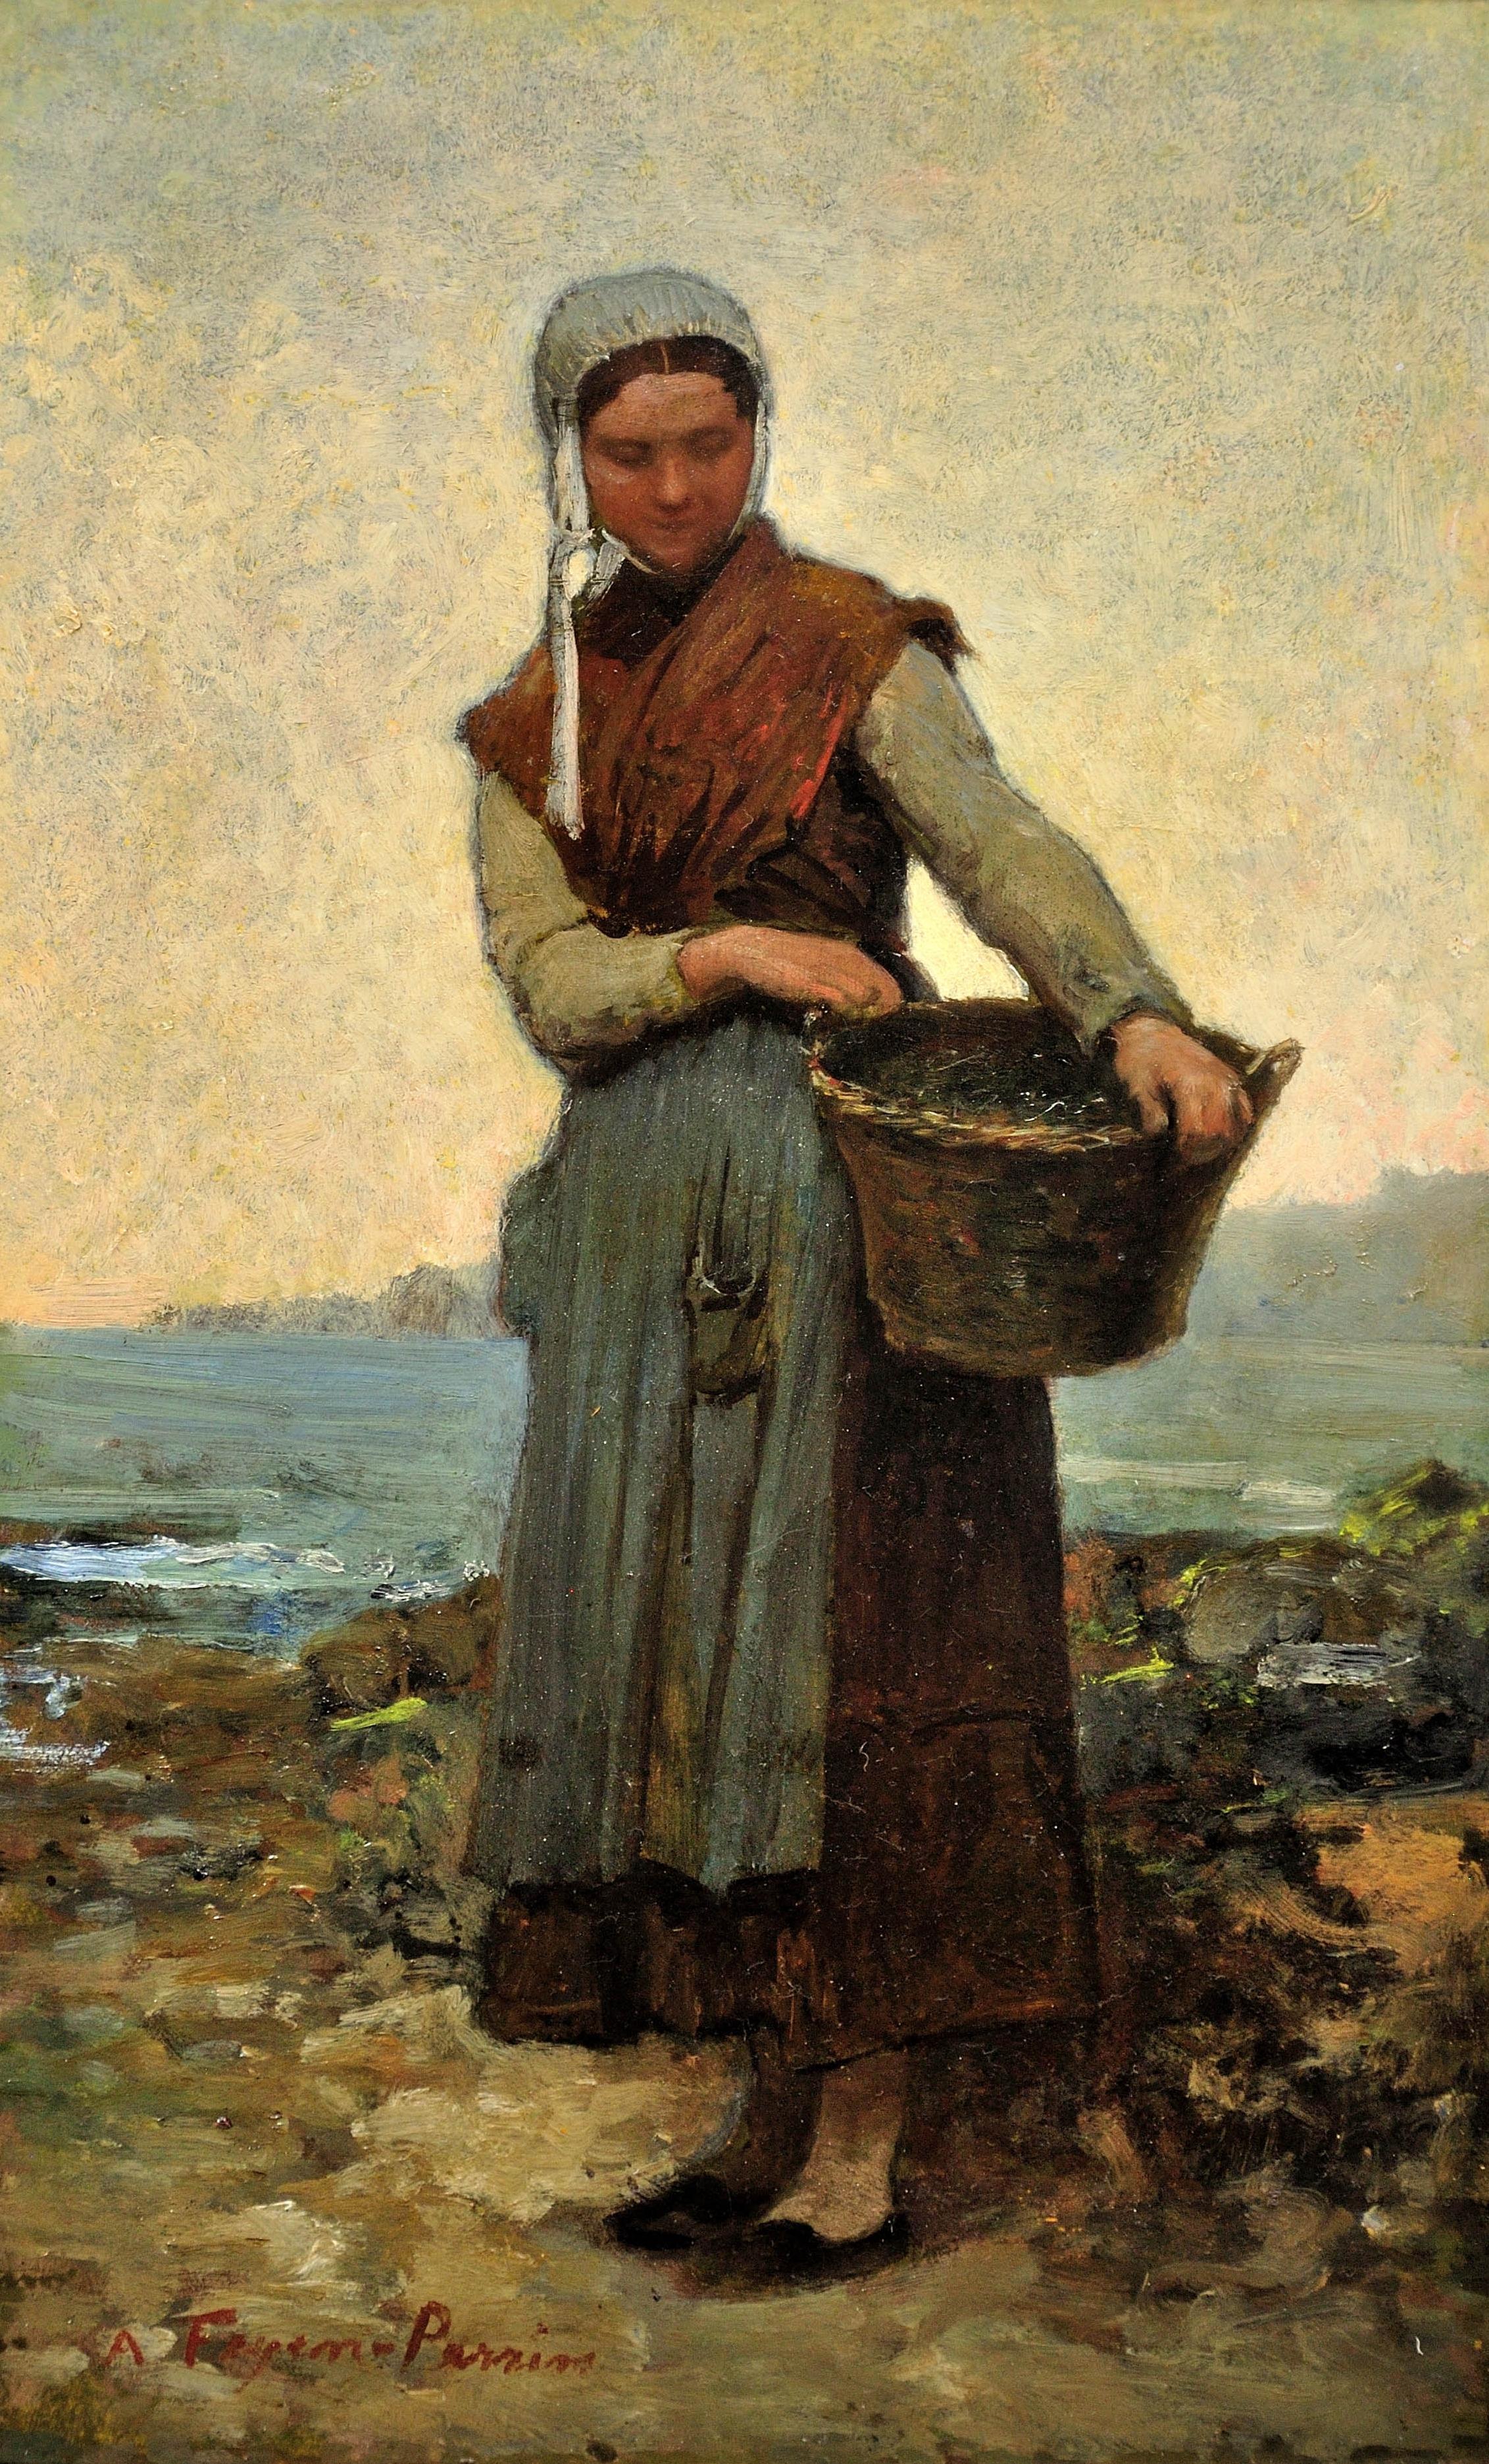 Ramasseuse de Coquillages, Bretagne.Shellfish Collector, Brittany. Breton 19th C - Painting by Auguste Feyen-Perrin